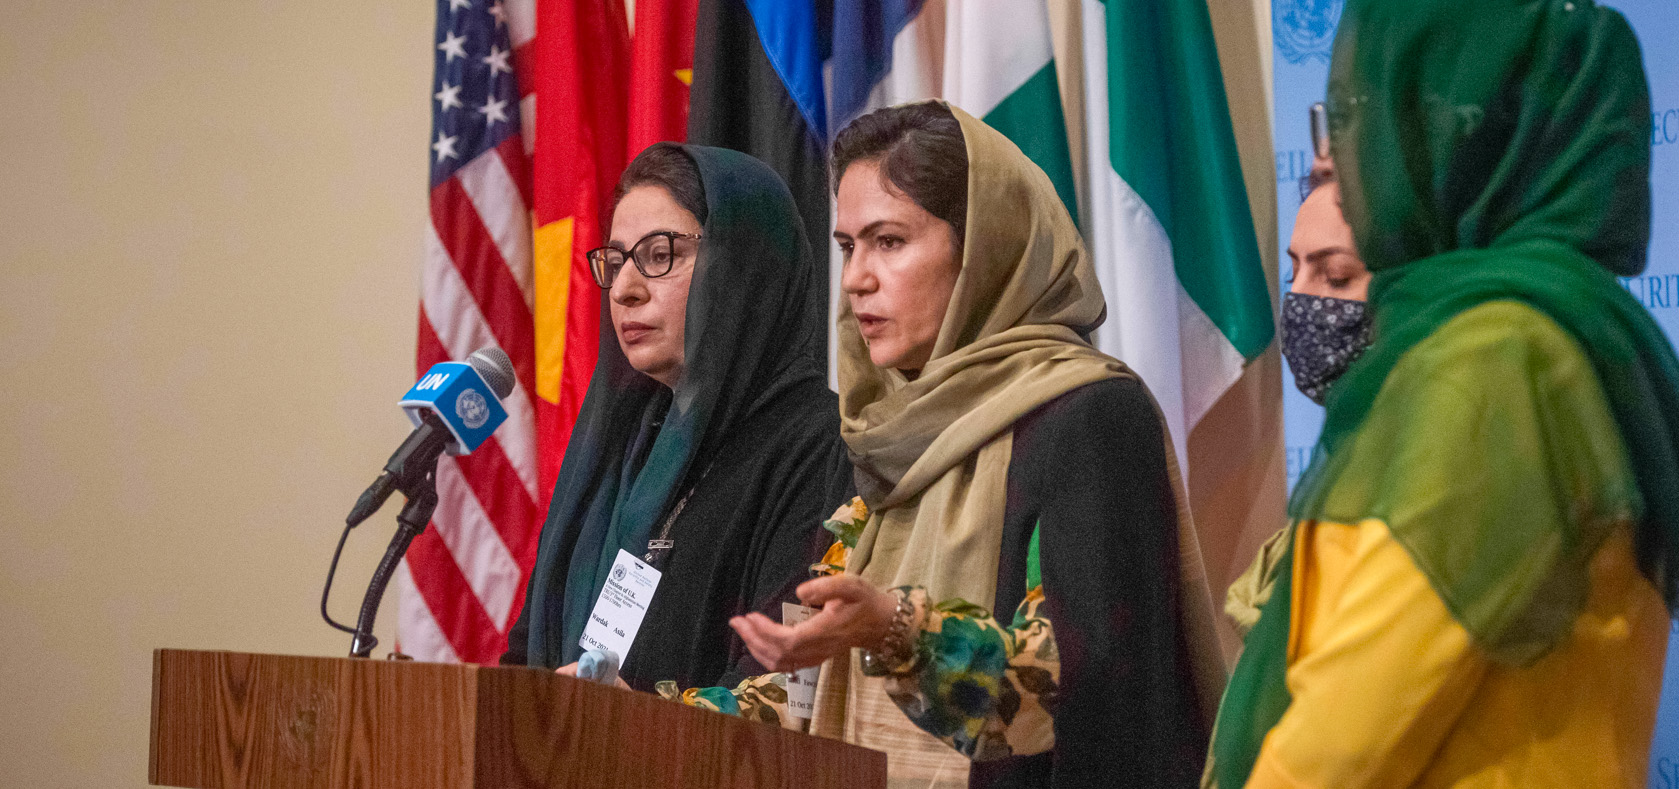 Afghan women leaders and human rights defenders speak to press outside of the UN Security Council chambers on 21 October 2021. Pictured from left to right: Asila Wardak, Fawzia Koofi (speaking), Anisa Shaheed and Naheed Farid. Photo: UN Women/Amanda Voisard